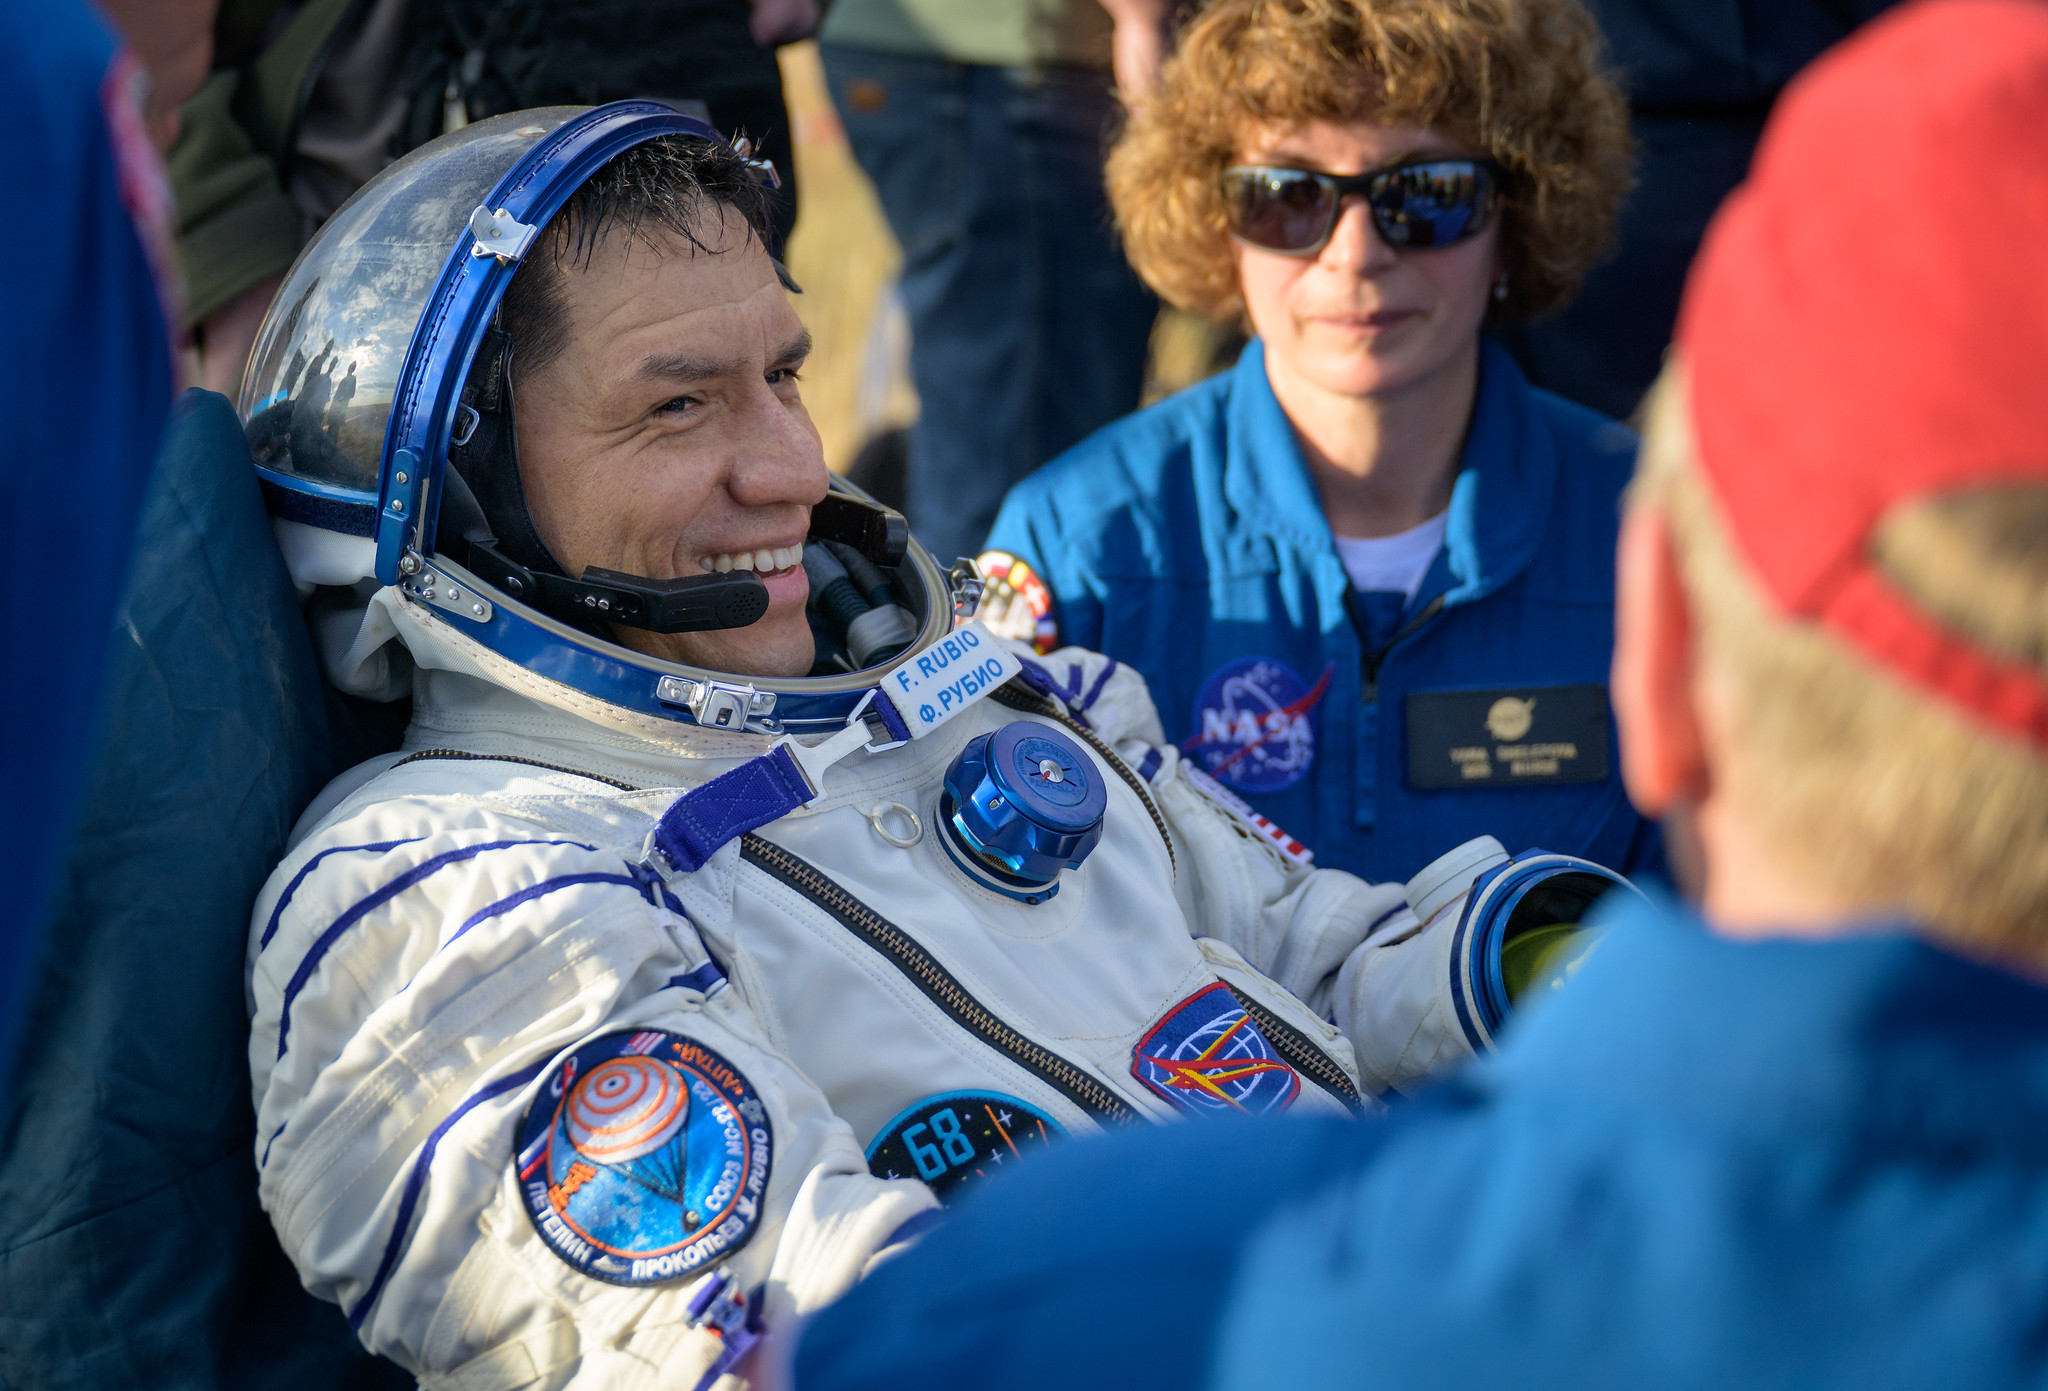 Expedition 69 NASA astronaut Frank Rubio is seen outside the Soyuz MS-23 spacecraft after he landed with Roscosmos cosmonauts Sergey Prokopyev and Dmitri Petelin in a remote area near the town of Zhezkazgan, Kazakhstan on Wednesday, Sept. 27, 2023.